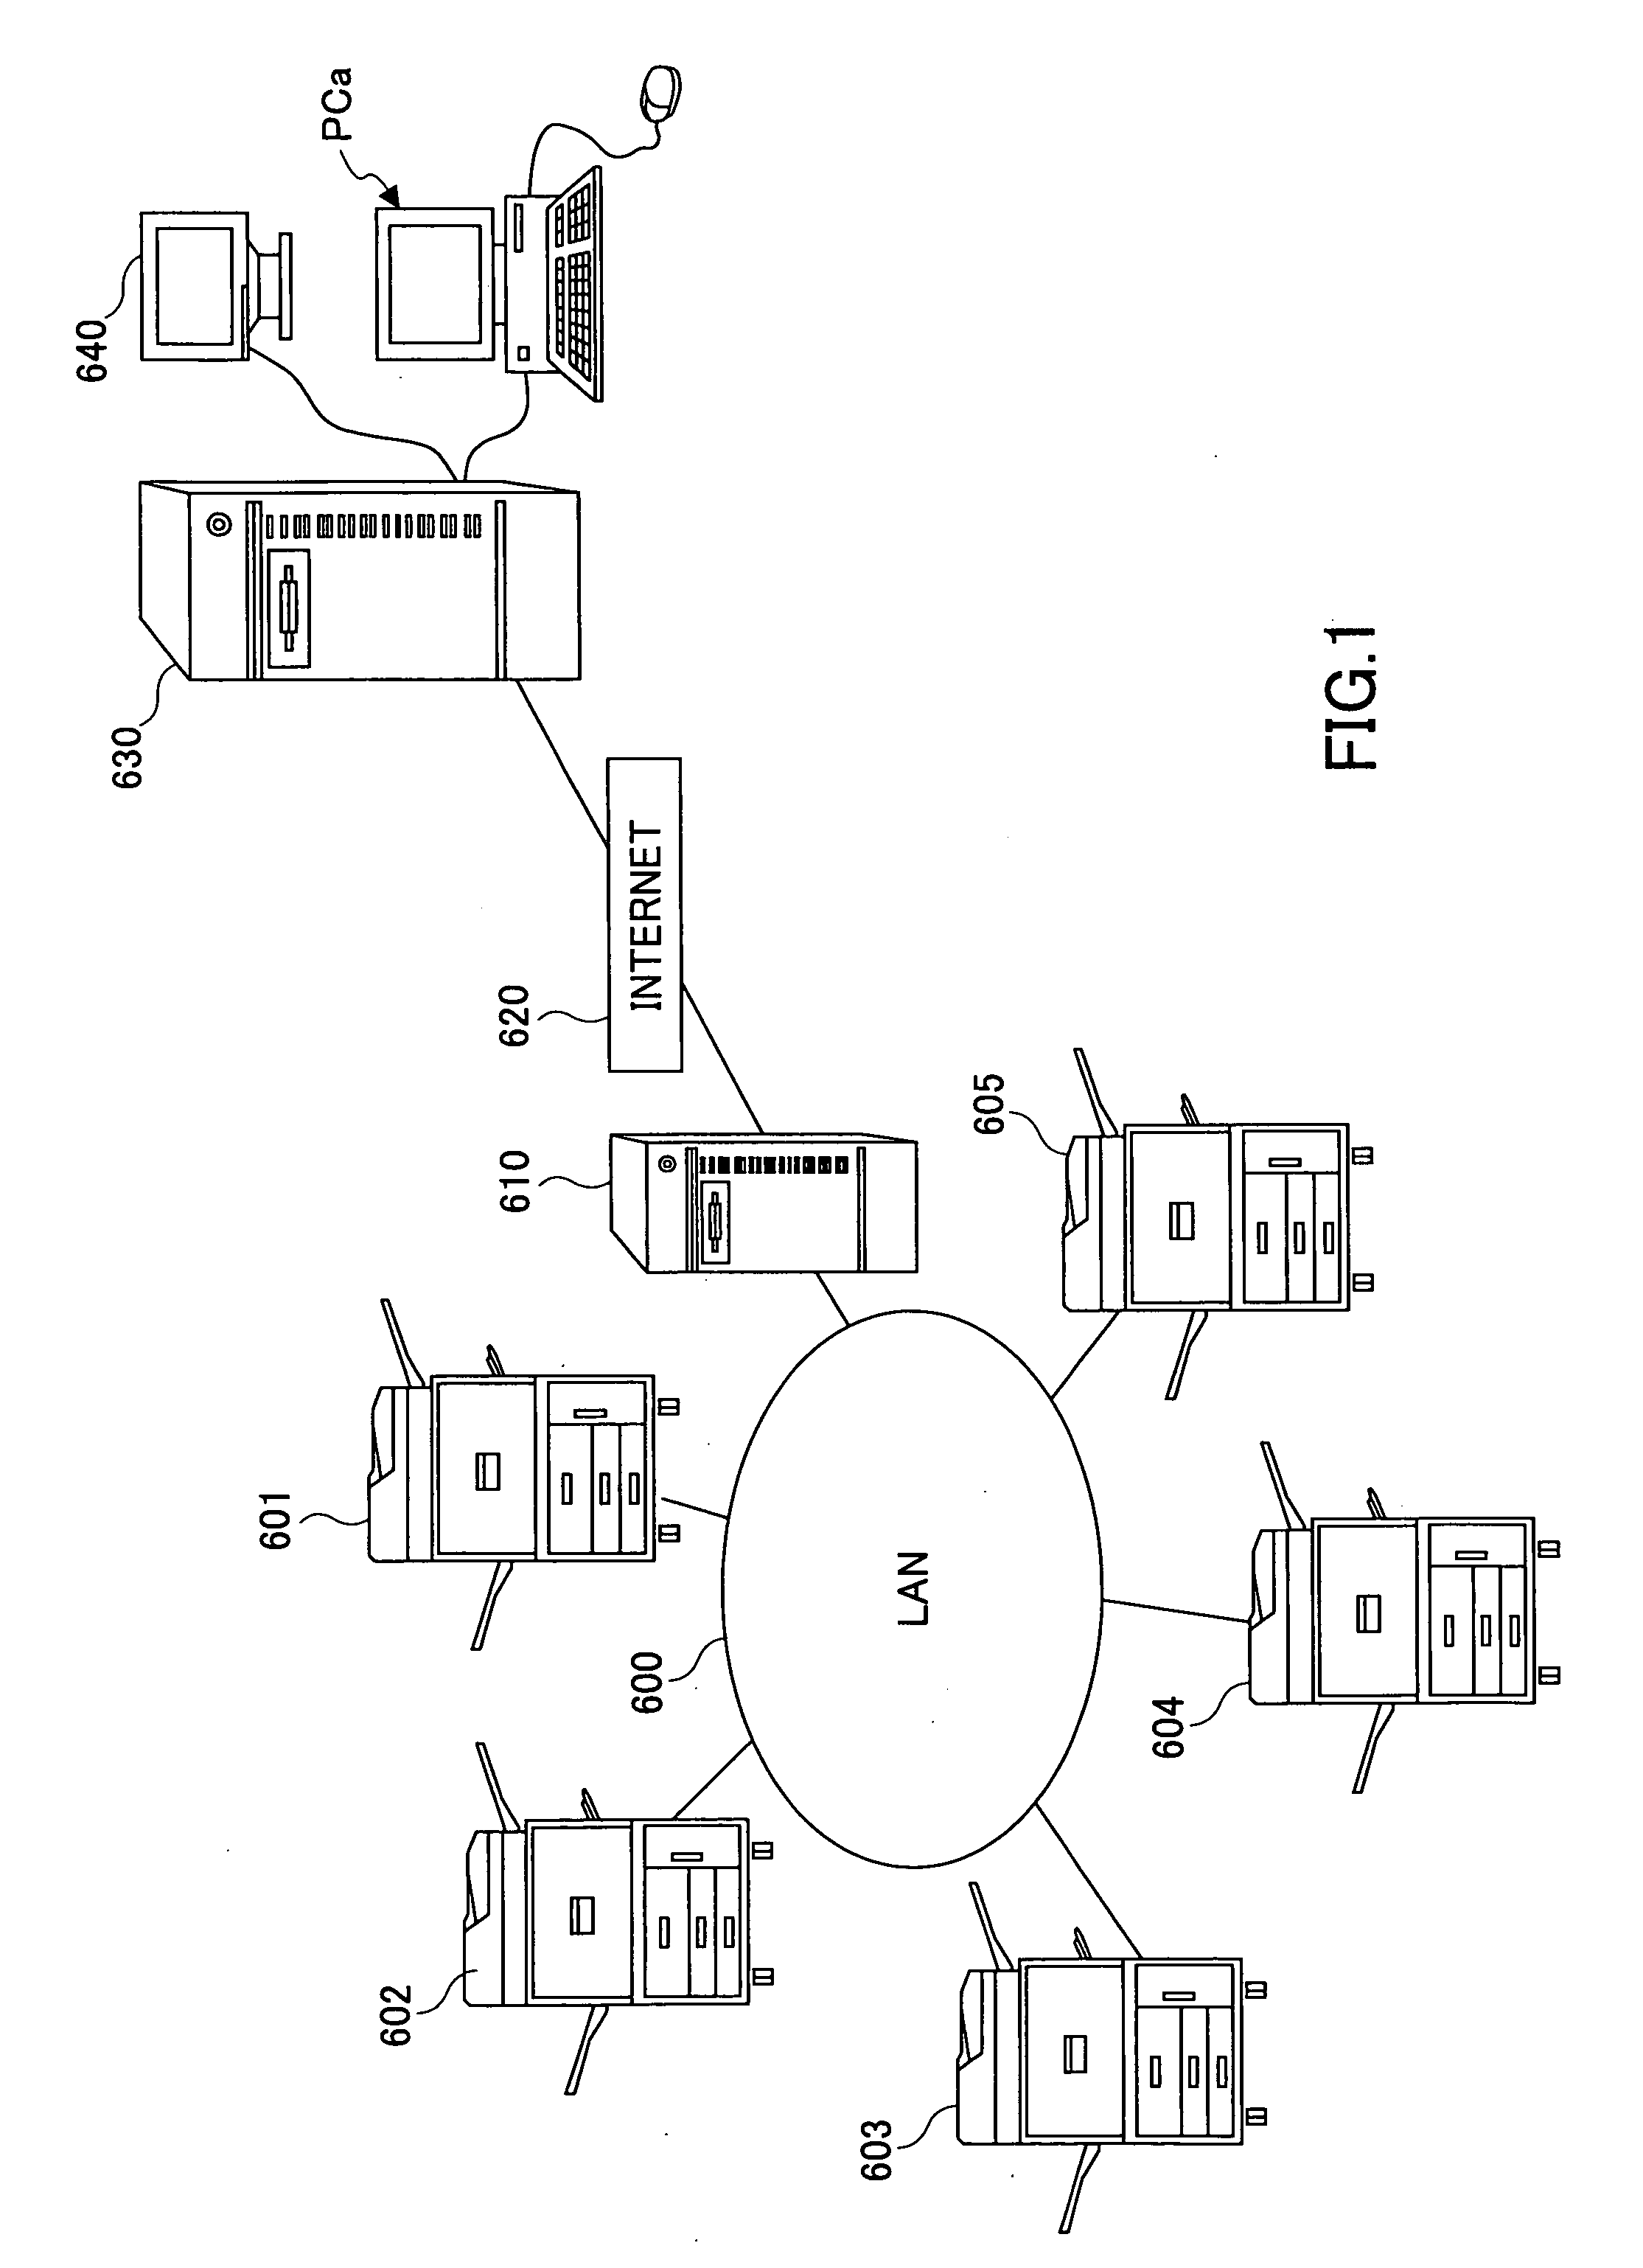 Management device of an image forming apparatus